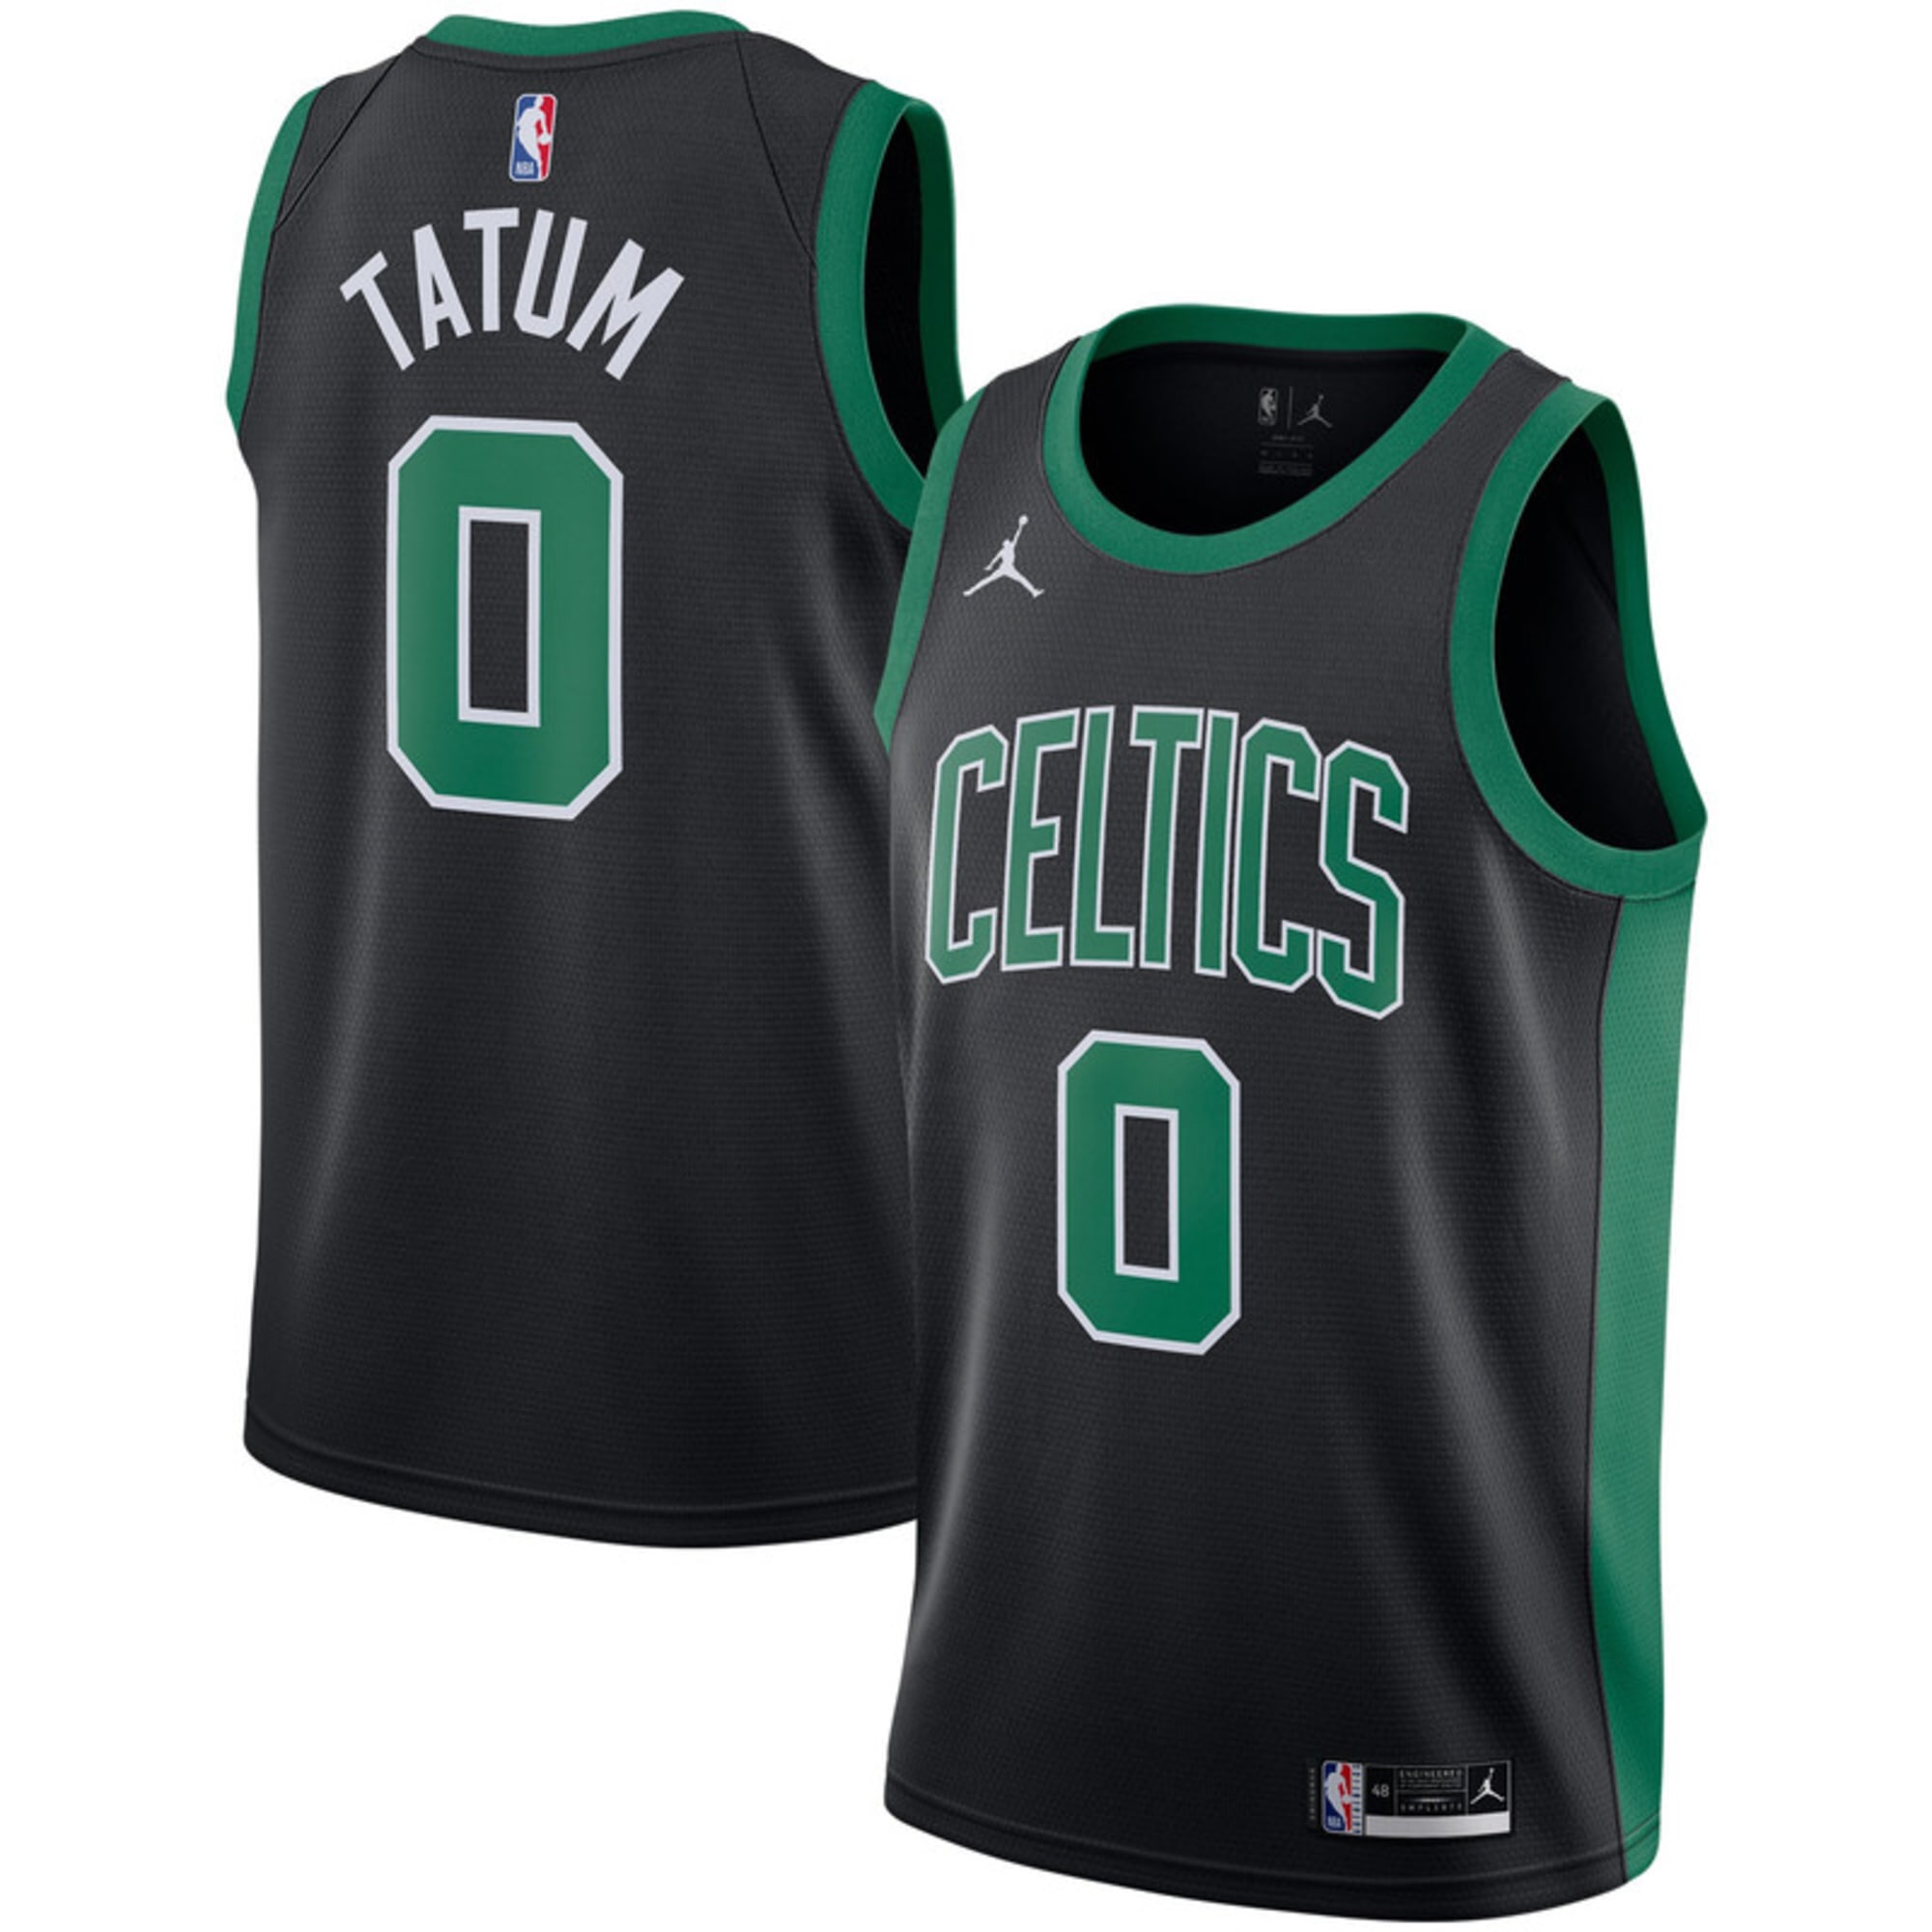 Perfect holiday gifts for the Boston Celtics fan